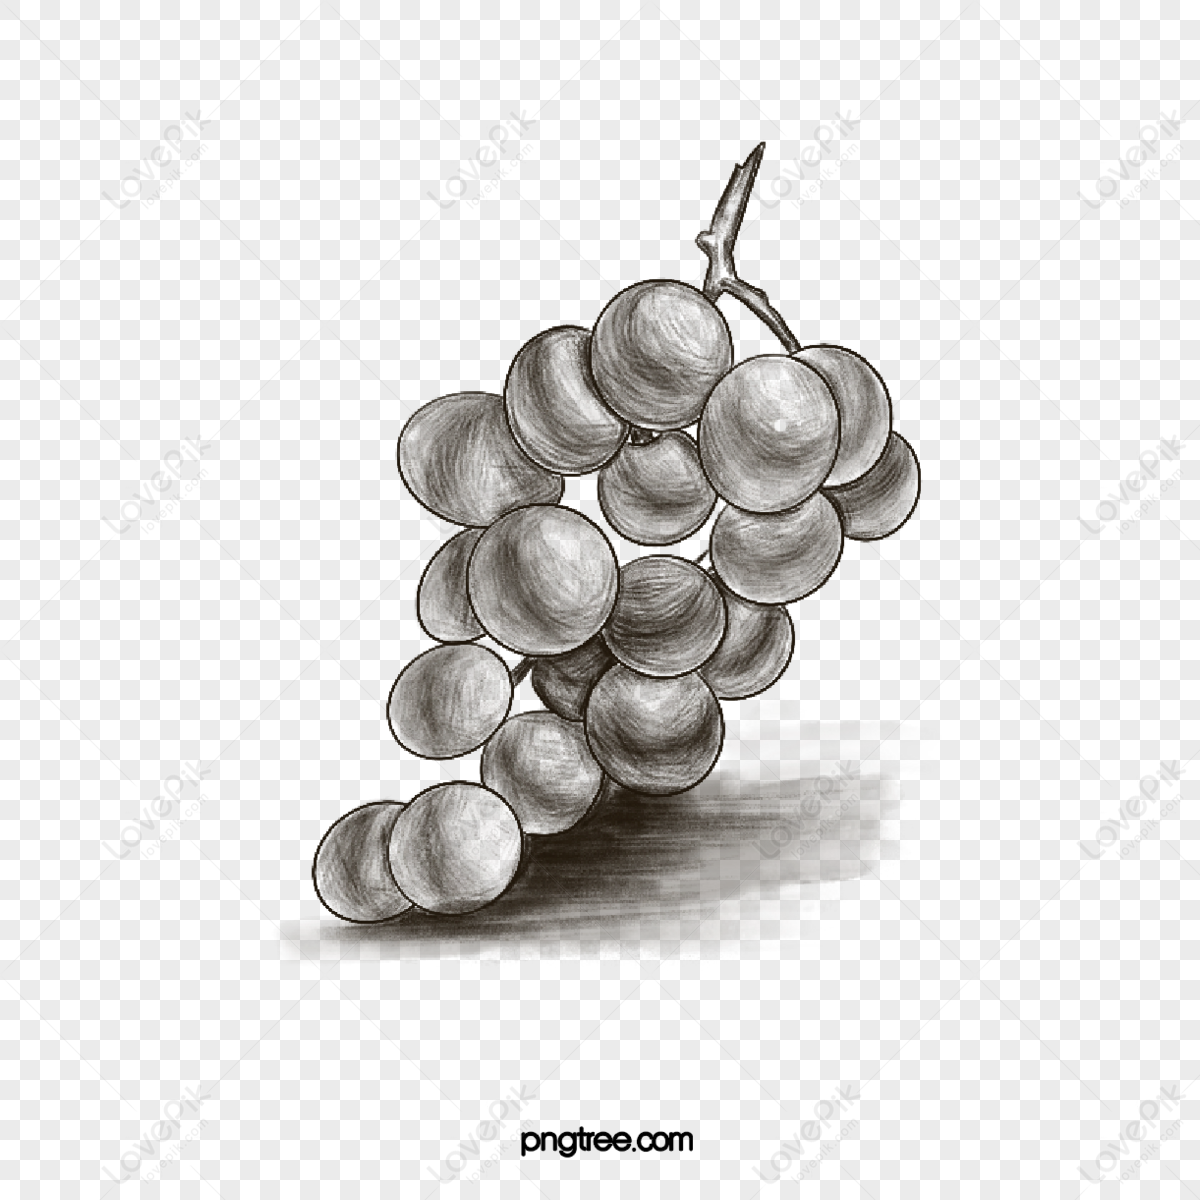 Grapes Drawing: Tips and Inspiration for Creating Your Own Grape Art